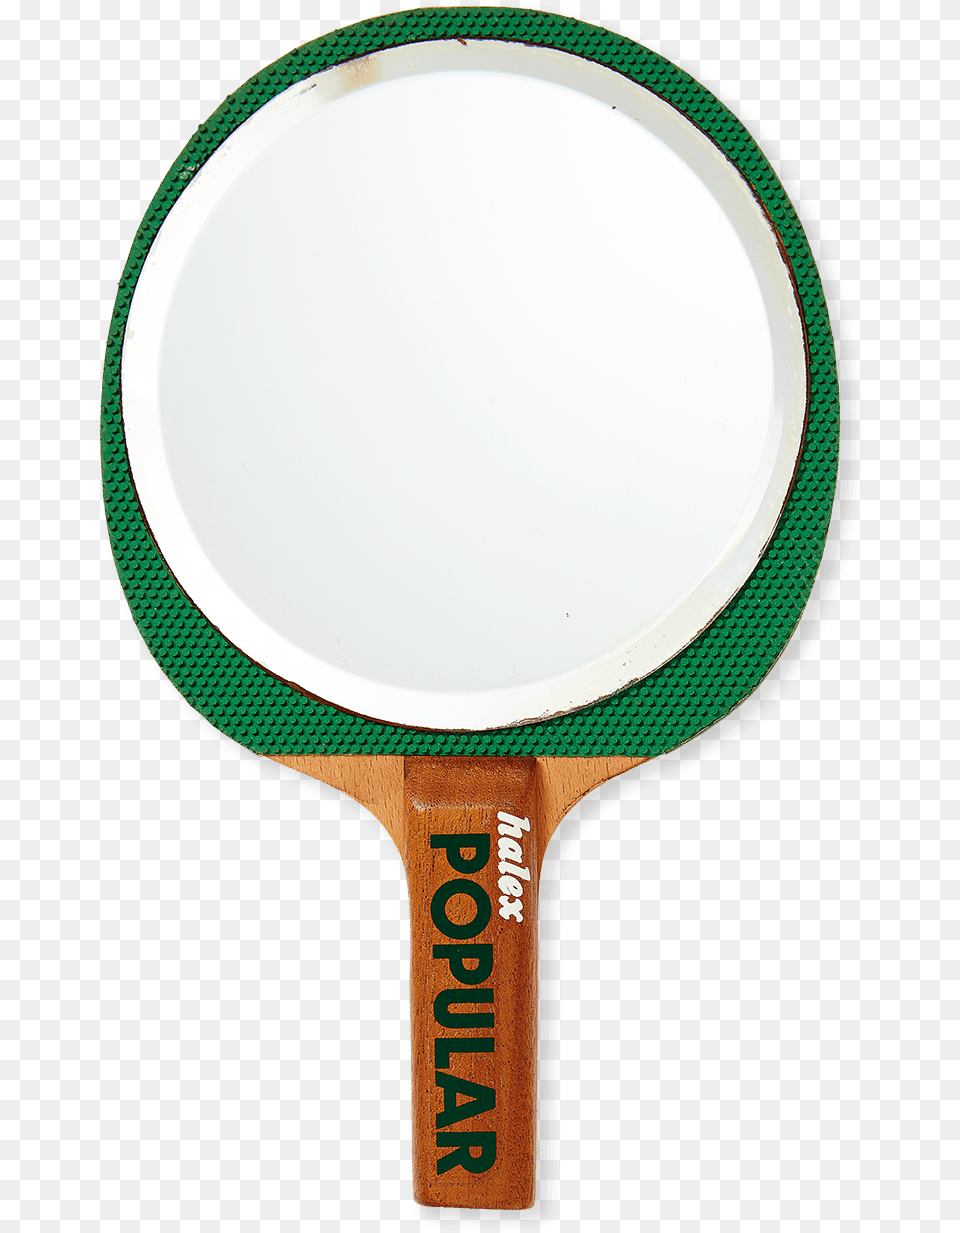 Table Tennis Racket Clipart Plate Free Png Download